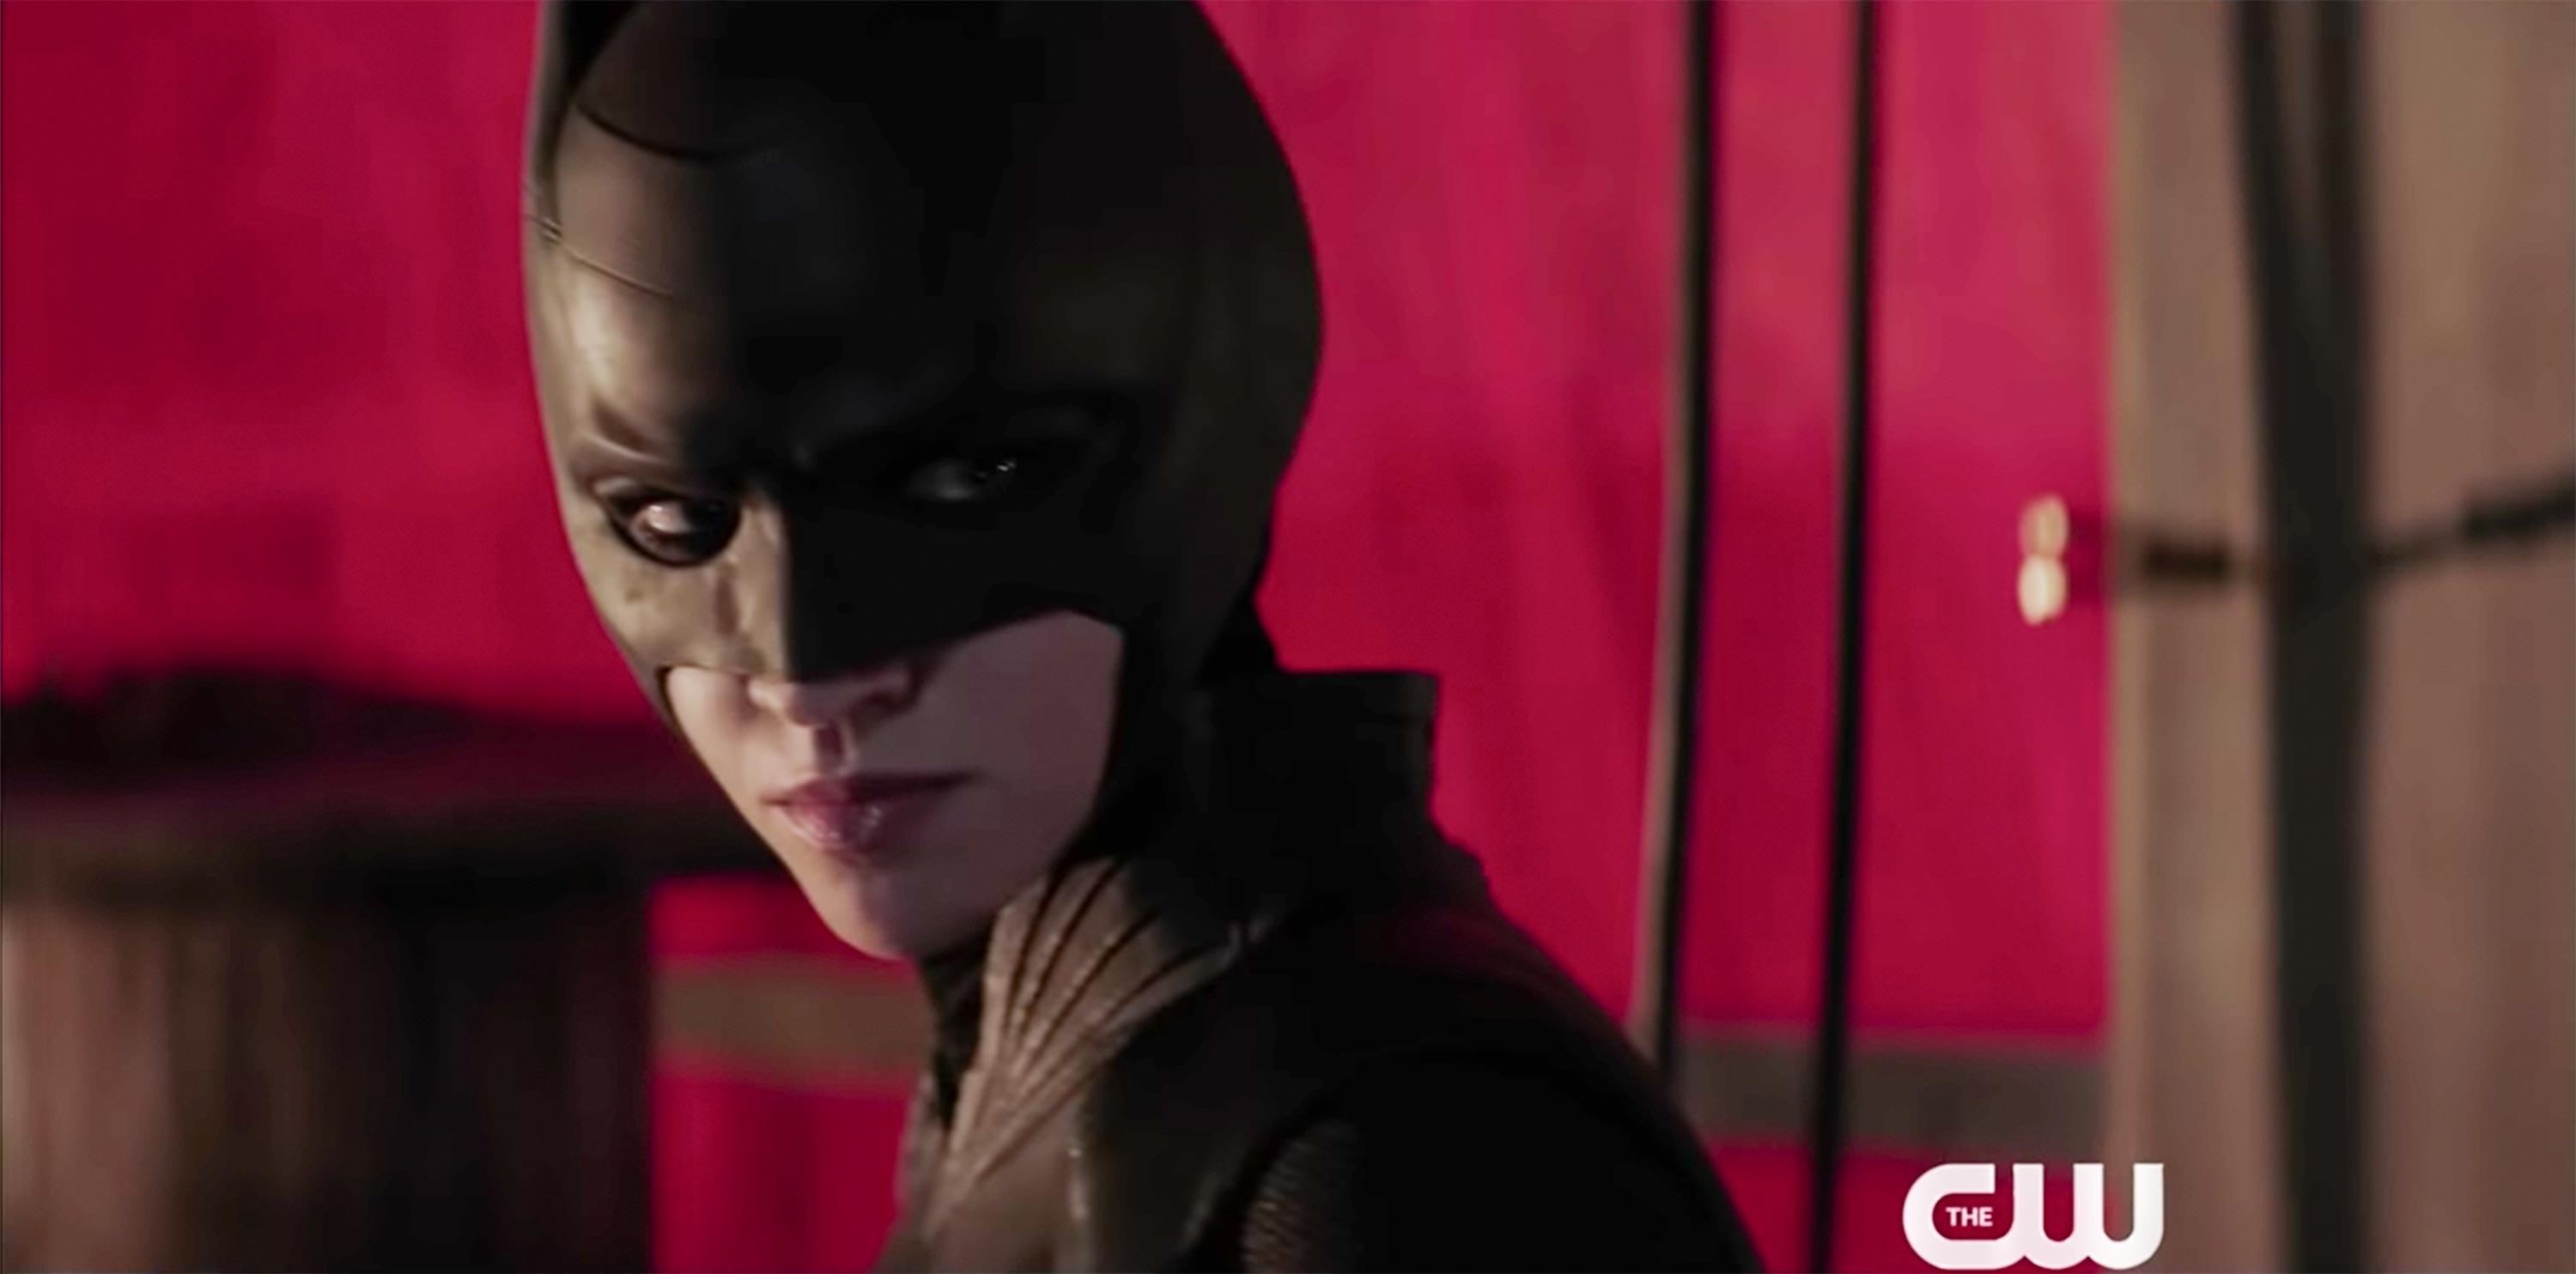 Ruby Rose suits up in trailer for The CW's Batwoman